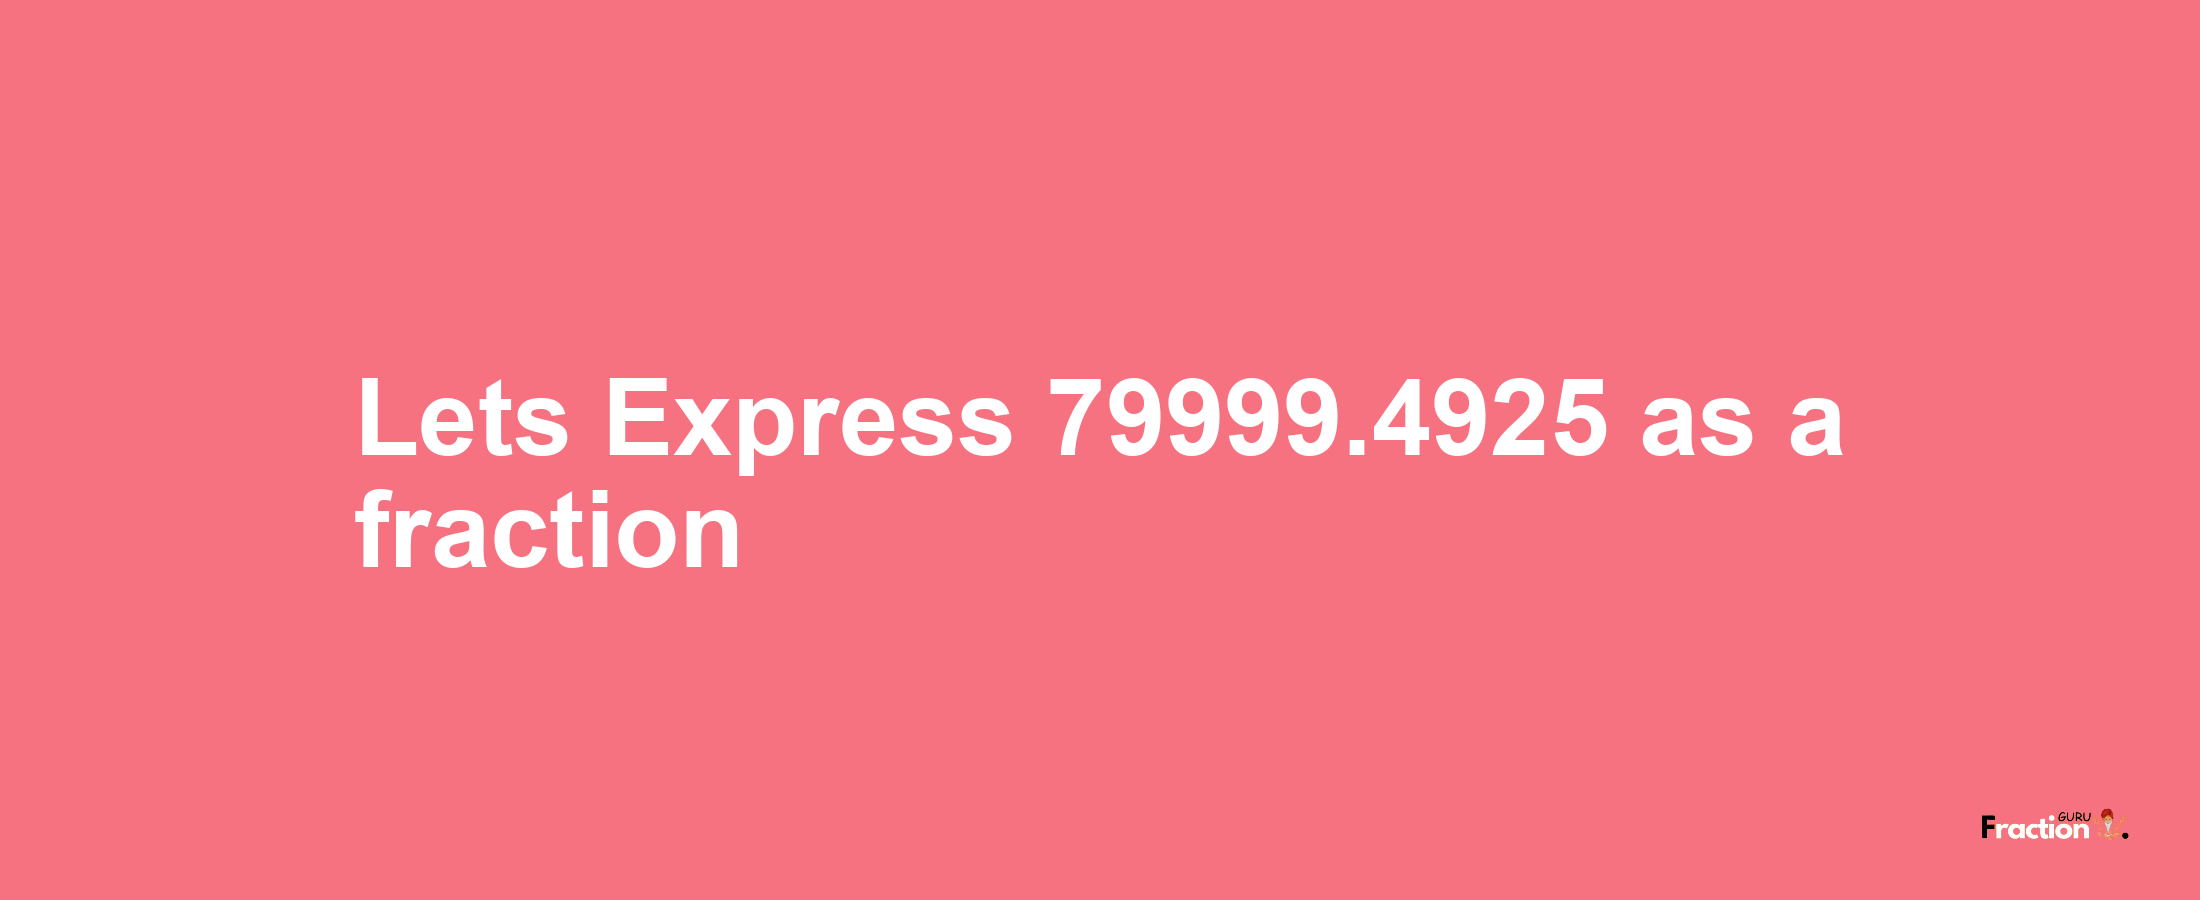 Lets Express 79999.4925 as afraction